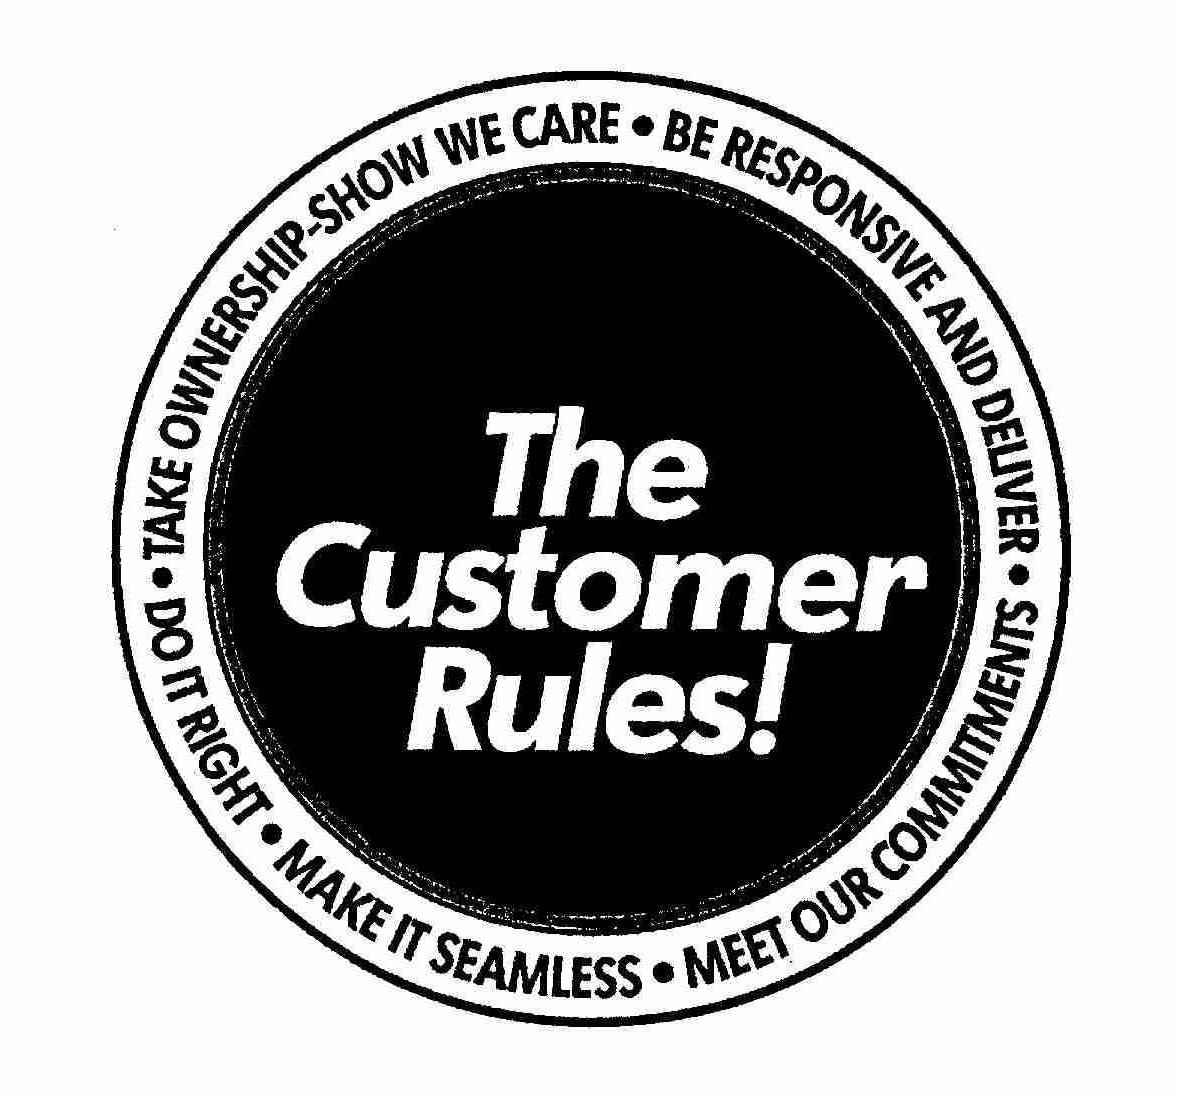  THE CUSTOMER RULES! BE RESPONSIVE AND DELIVER Â· MEET OUR COMMITMENTS Â· MAKE IT SEAMLESS Â· DO IT RIGHT Â· TAKE OWNERSHIP-SHOW 